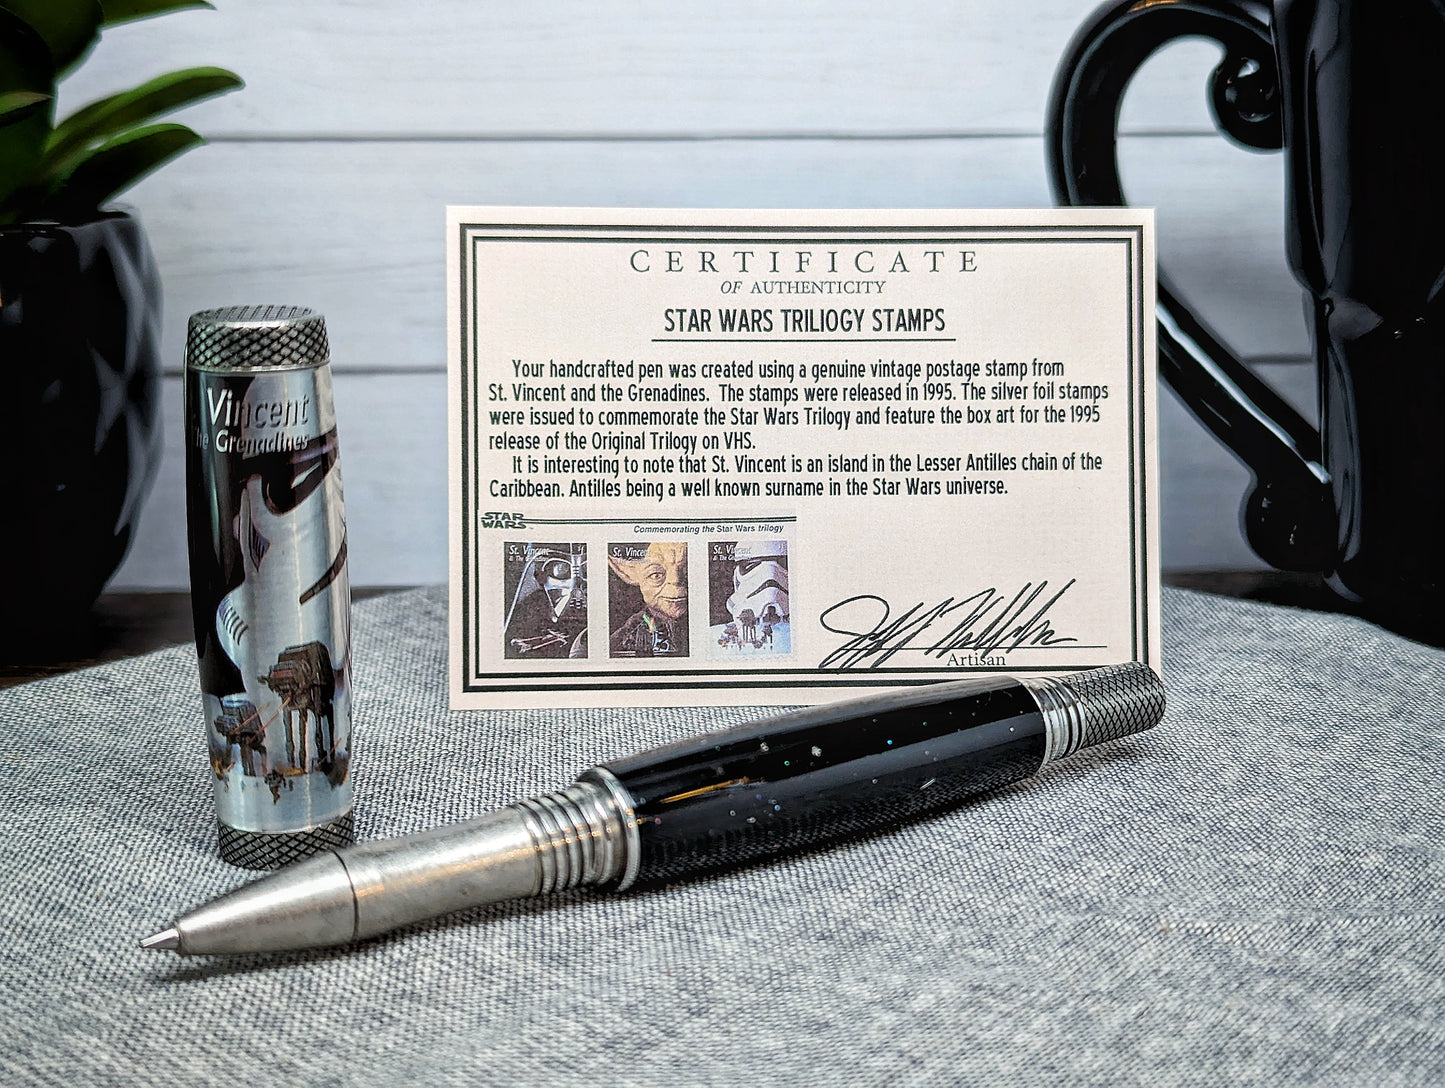 Stormtrooper rollerball collectible stamp